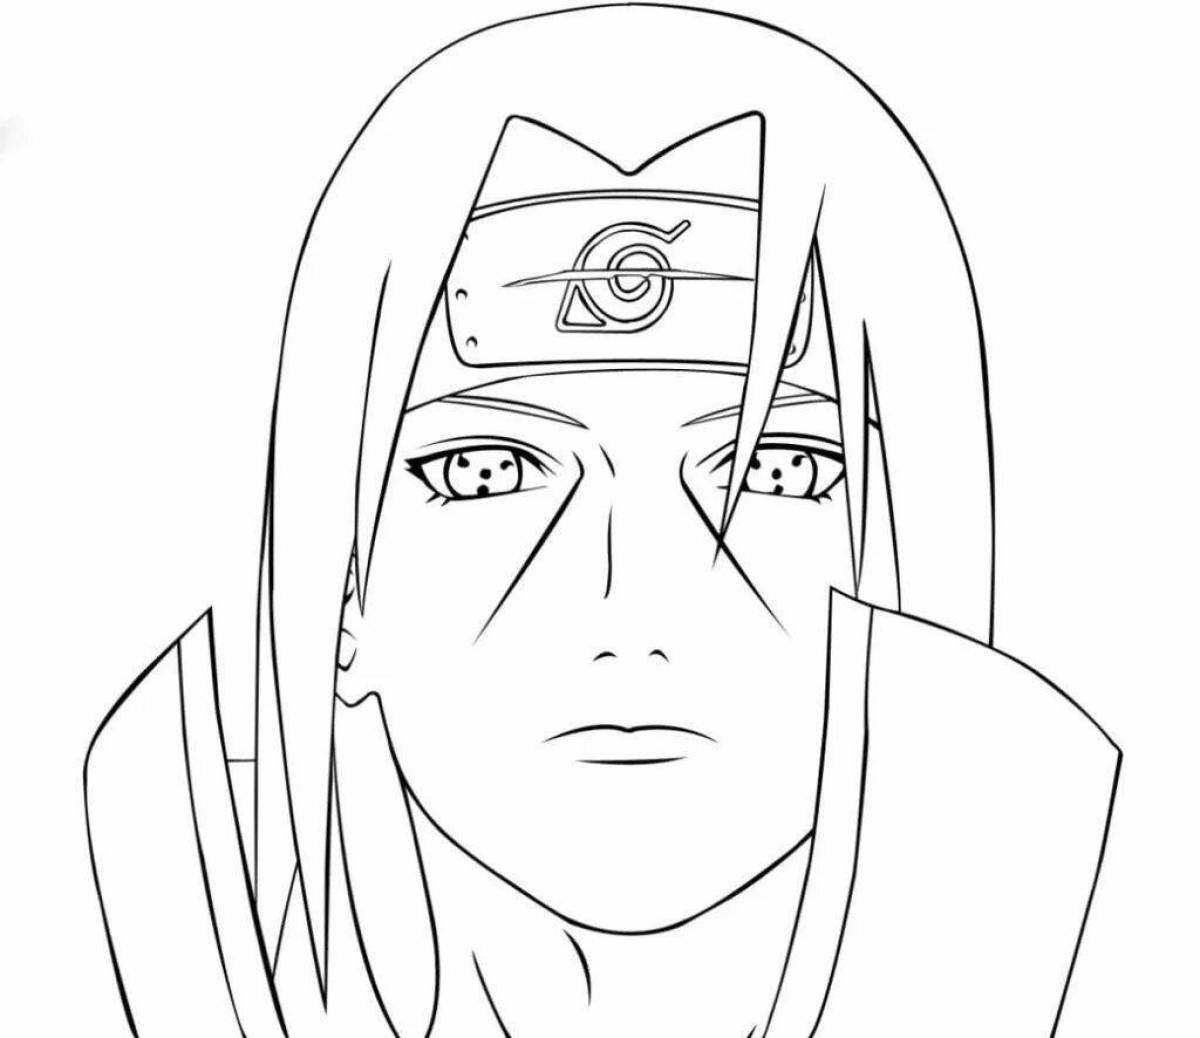 Temptingly drawn itachi coloring page